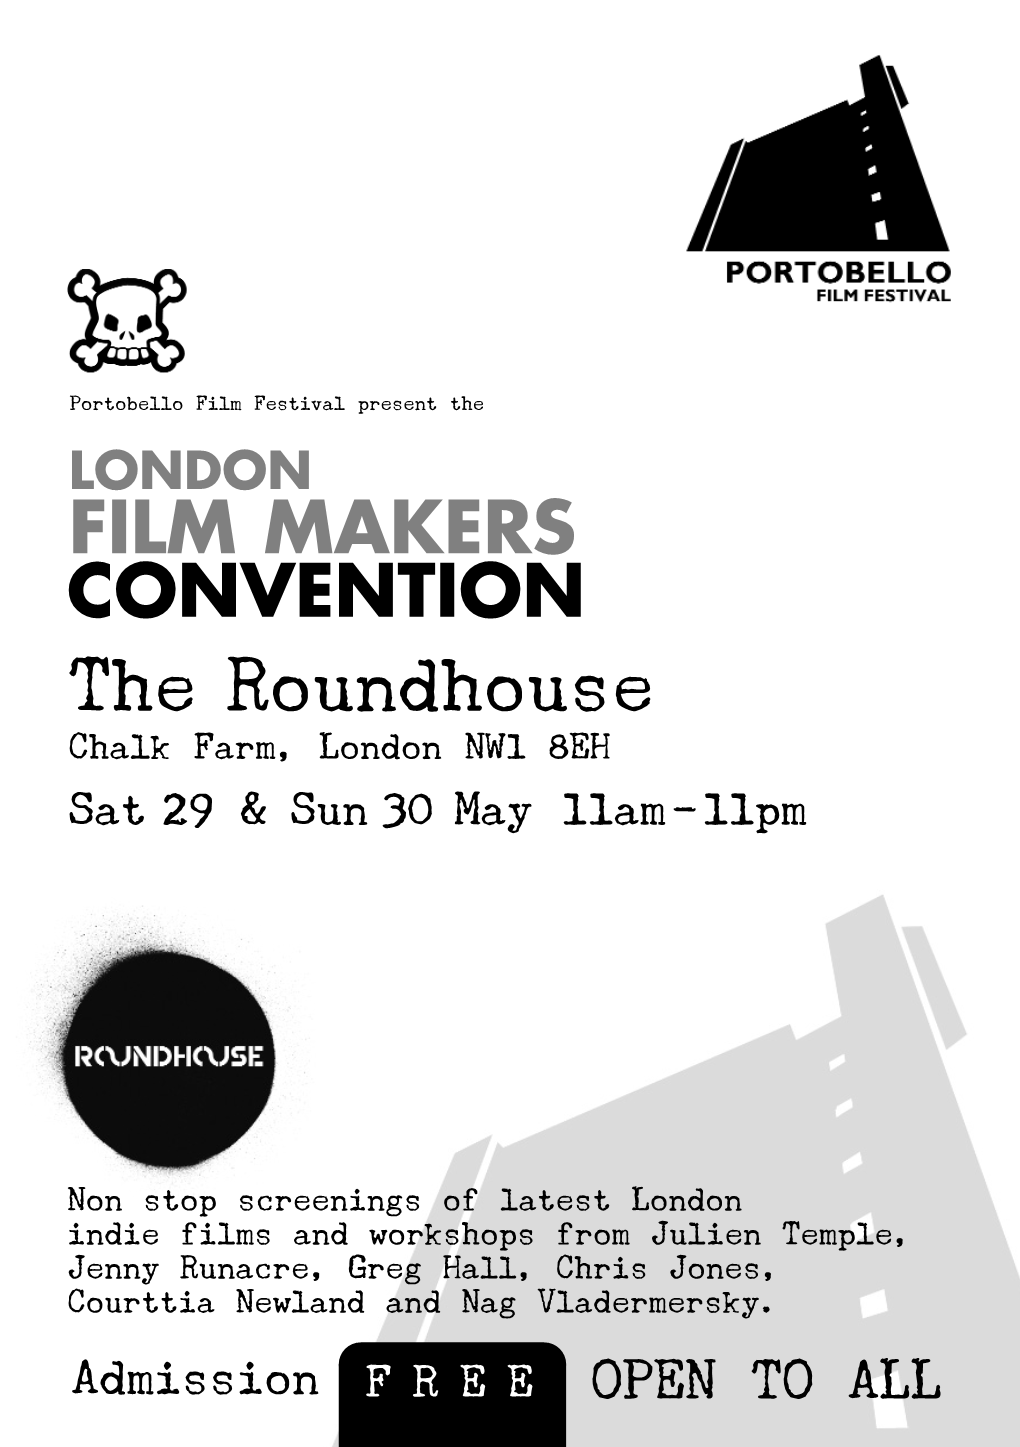 LONDON FILM MAKERS CONVENTION the Roundhouse Chalk Farm, London NW1 8EH Sat 29 & Sun 30 May 11Am-11Pm